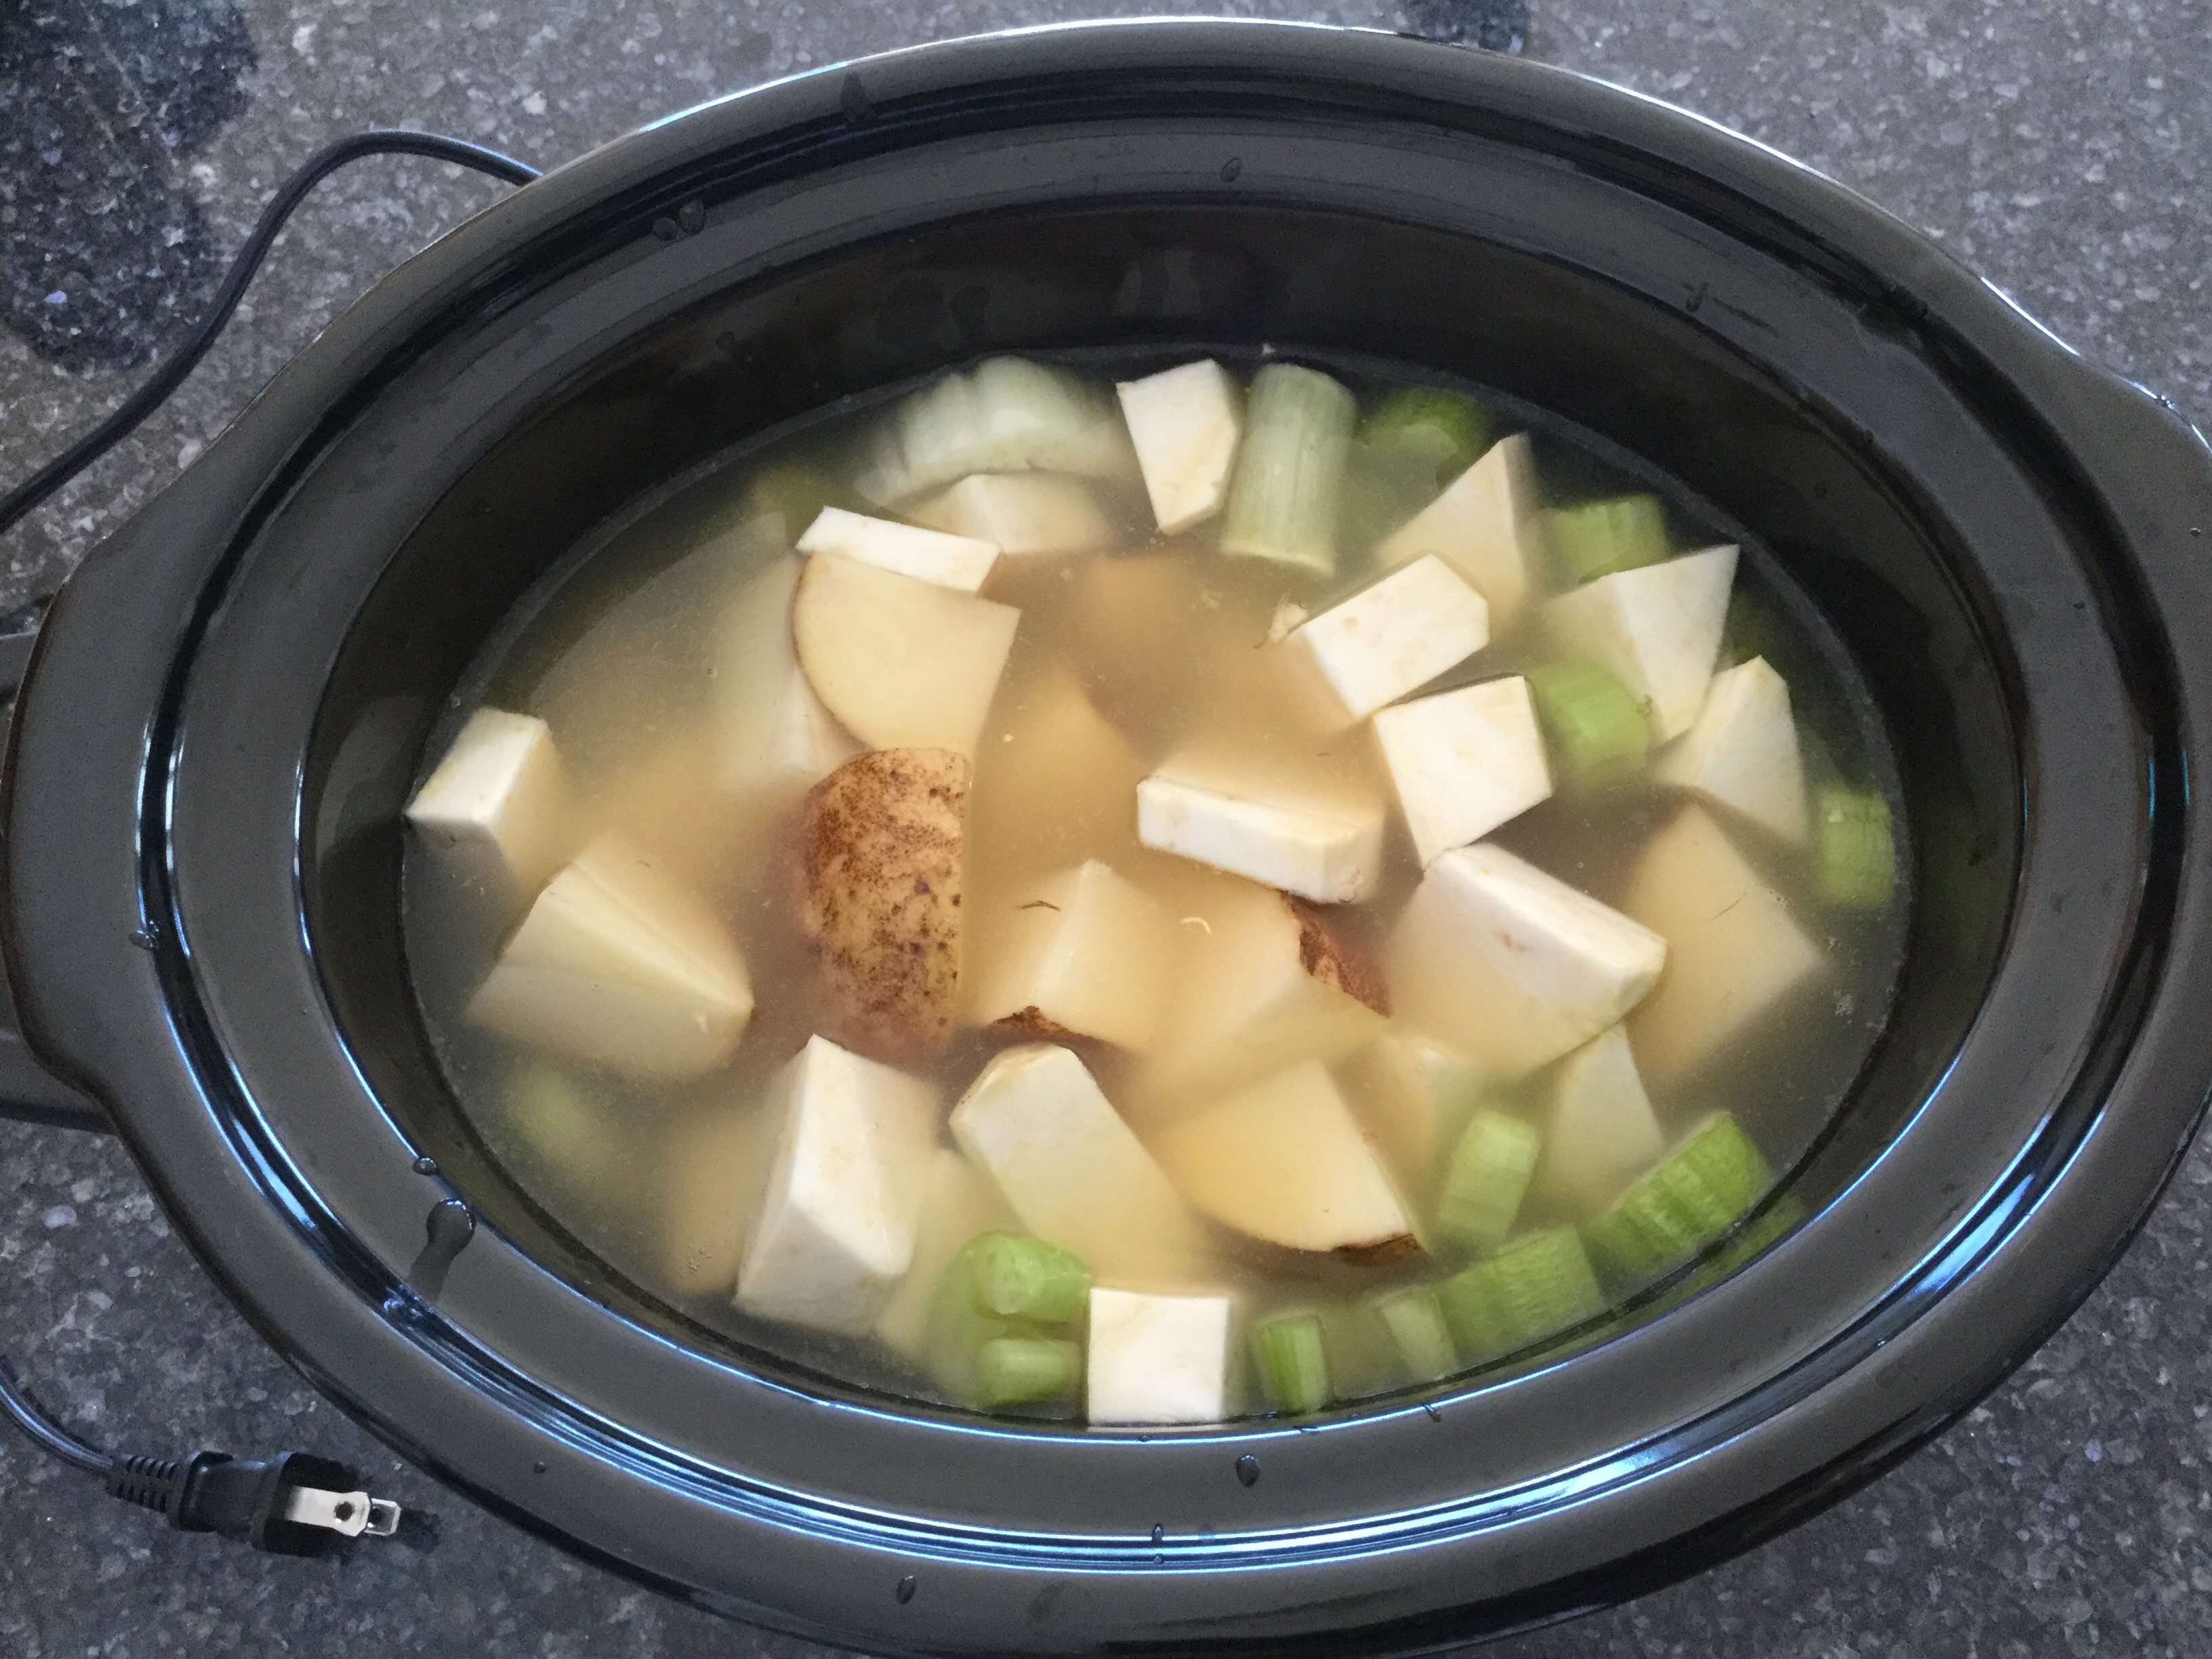 Add to slow cooker. You can add any additional veggies you like - I have added turnips, parsnips, etc.